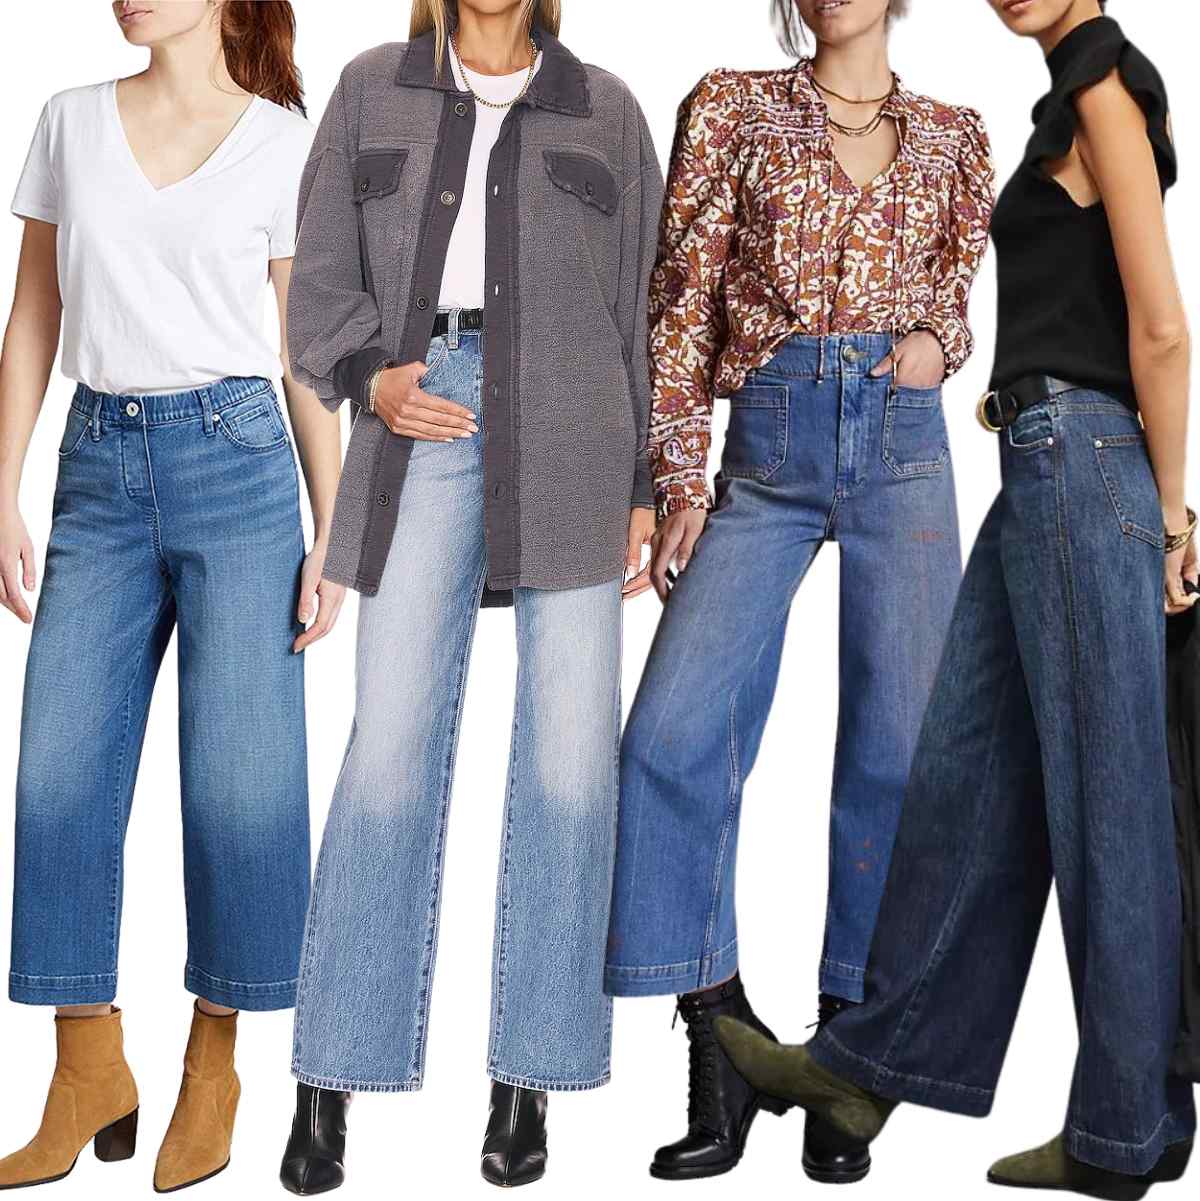 Collage of 4 women wearing ankle boot outfits with wide leg jeans.